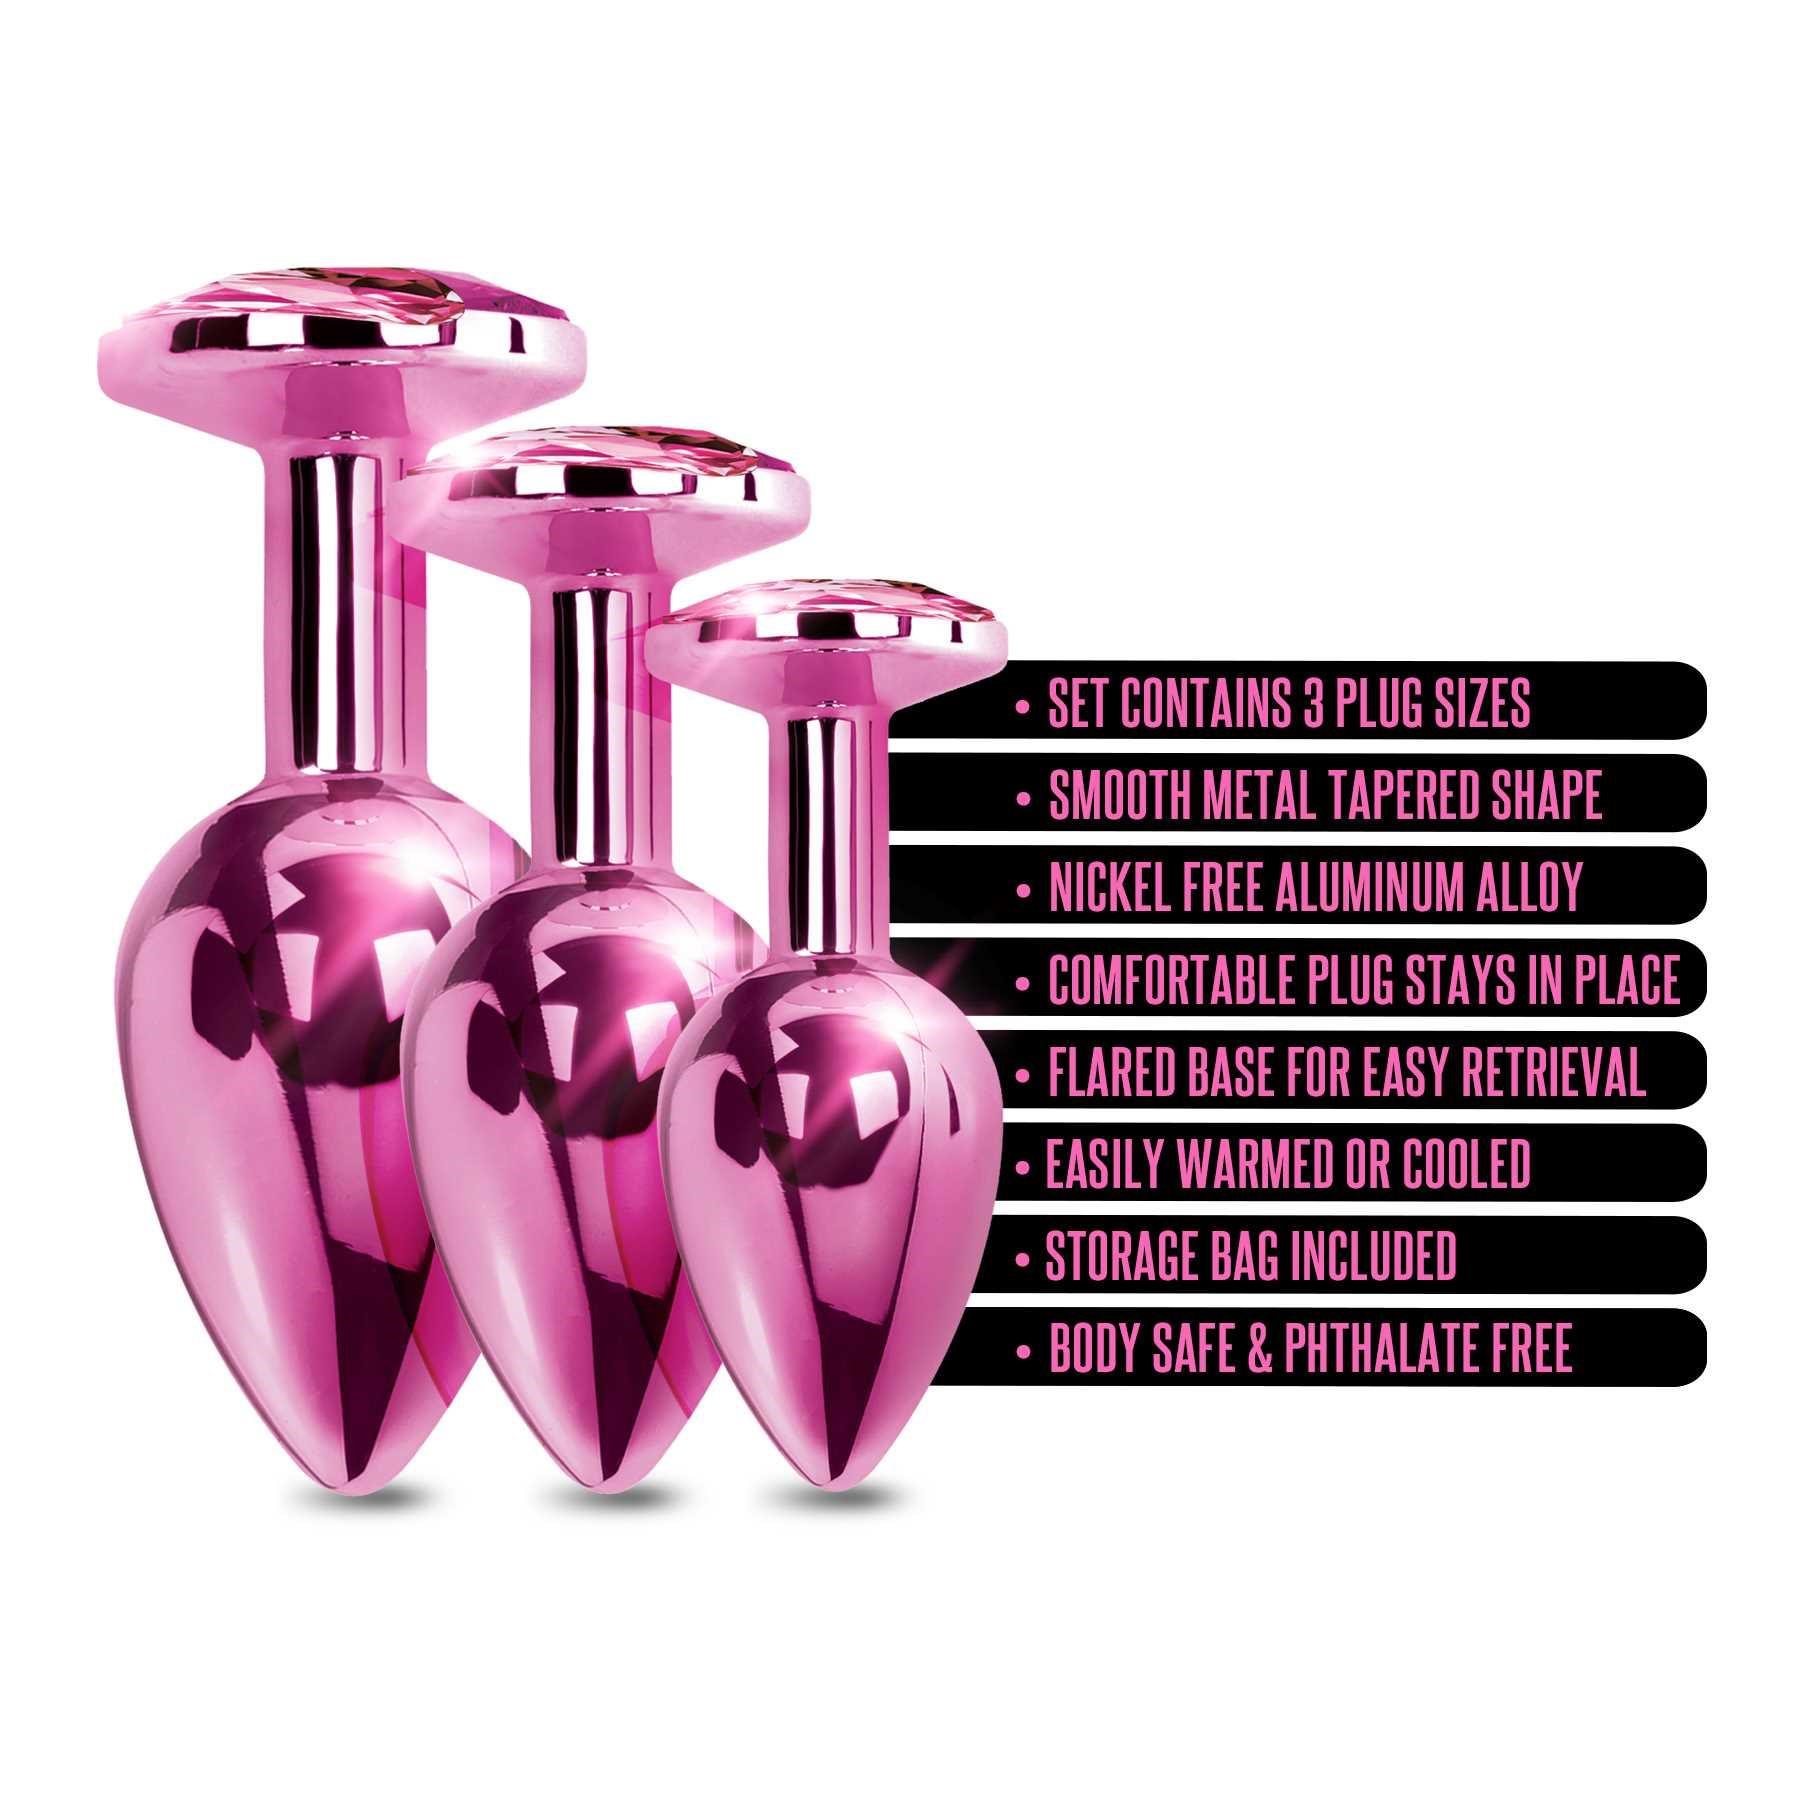 NIXIE Metal Butt Plug Trainer Set Metallic pink feature call outs sheet